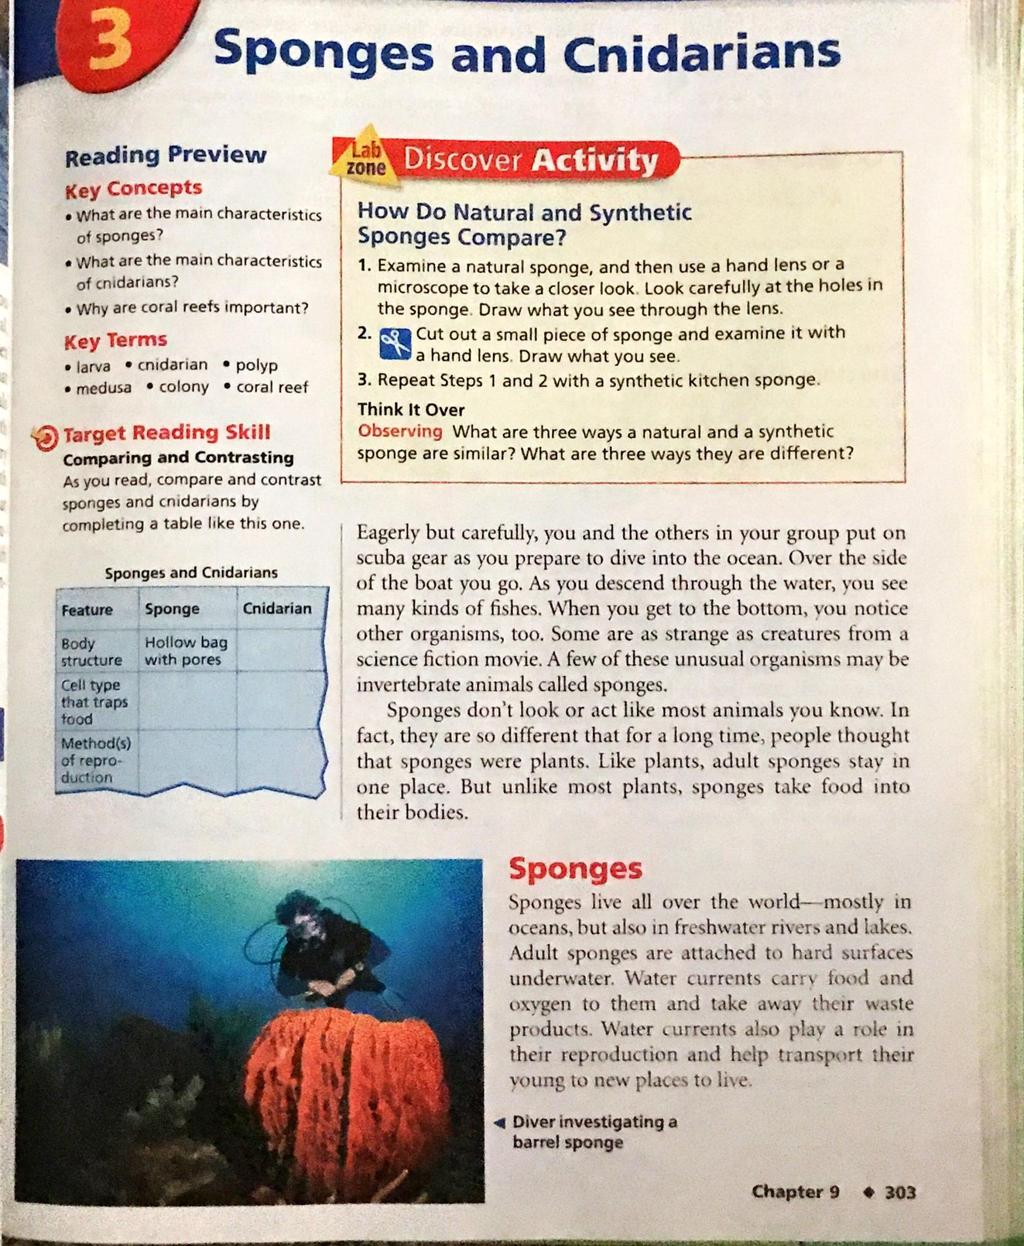 Sponges and Cnidarians Reading Preview Key Concepts What are the main characteristics of sponges? What are the main characteristics of cnidarians? Why are coral reefs important?